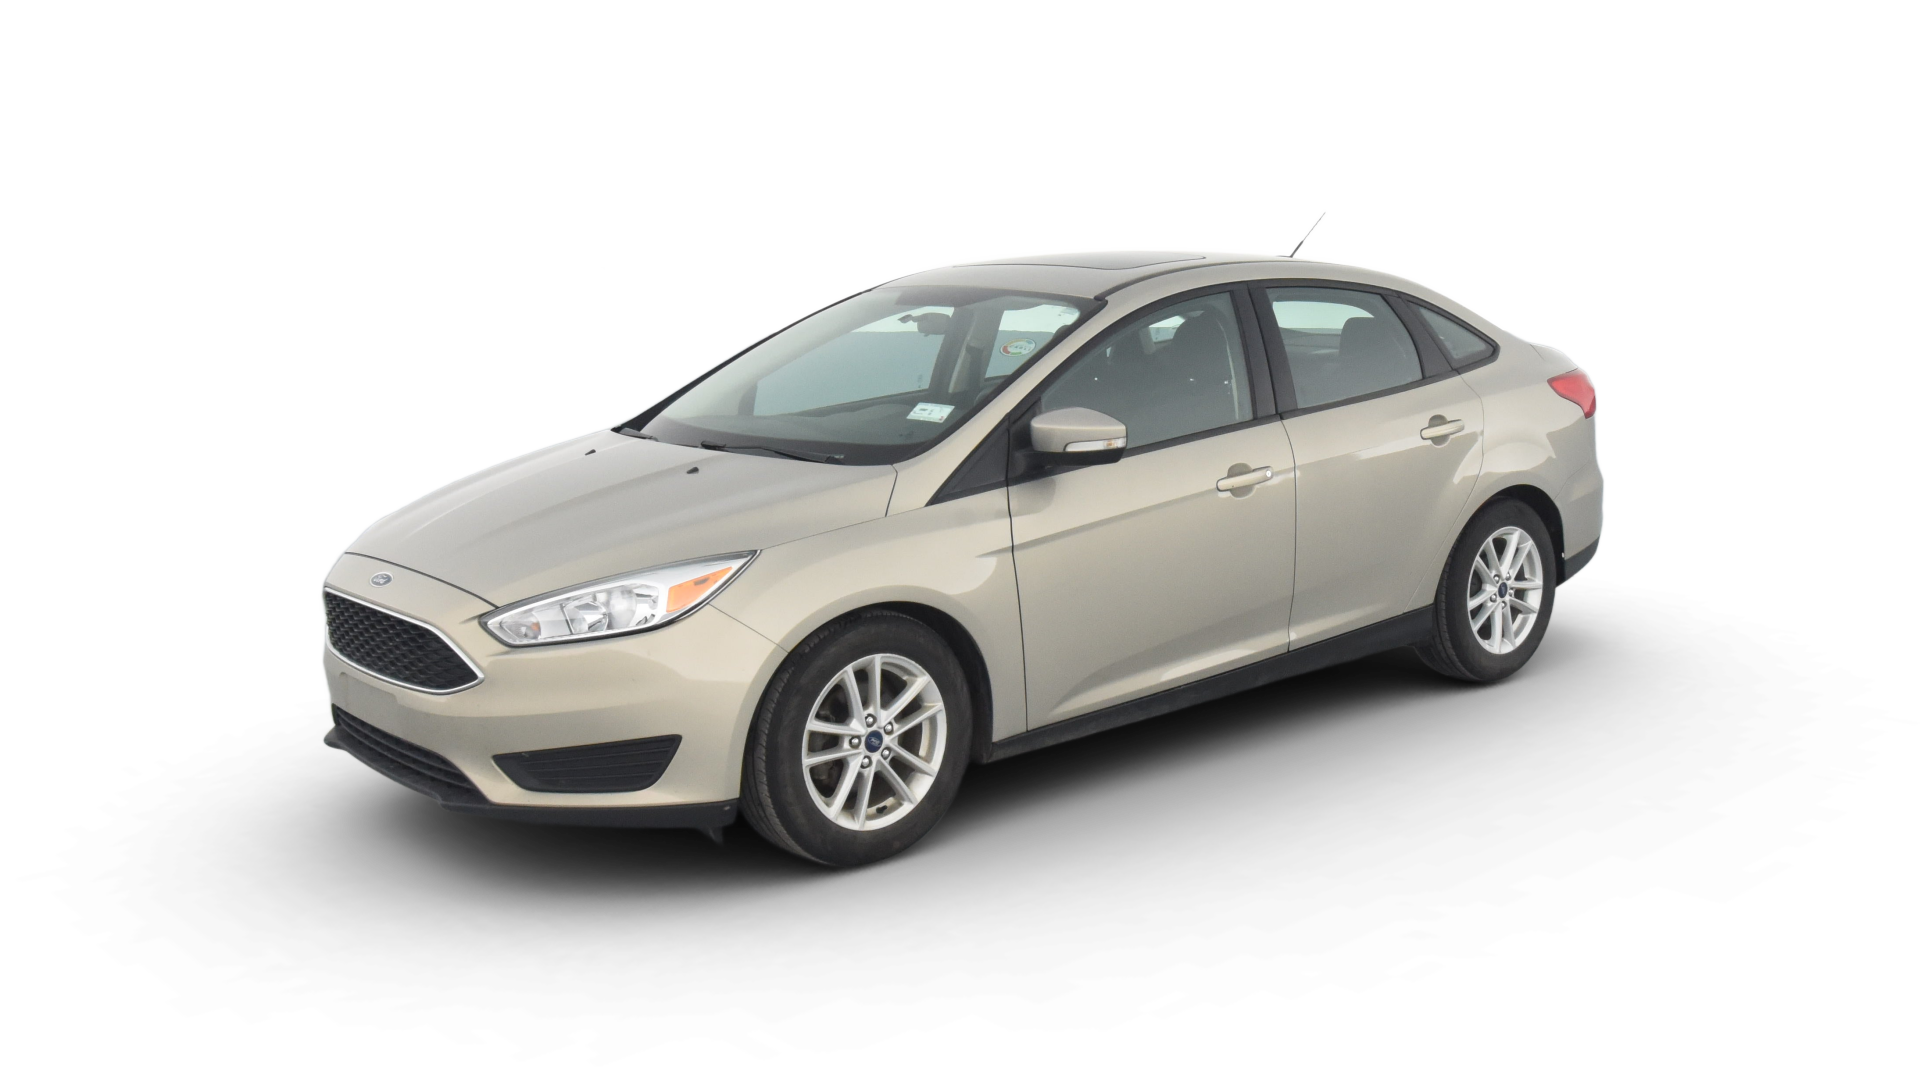 Used Ford Focus For Sale Online | Carvana